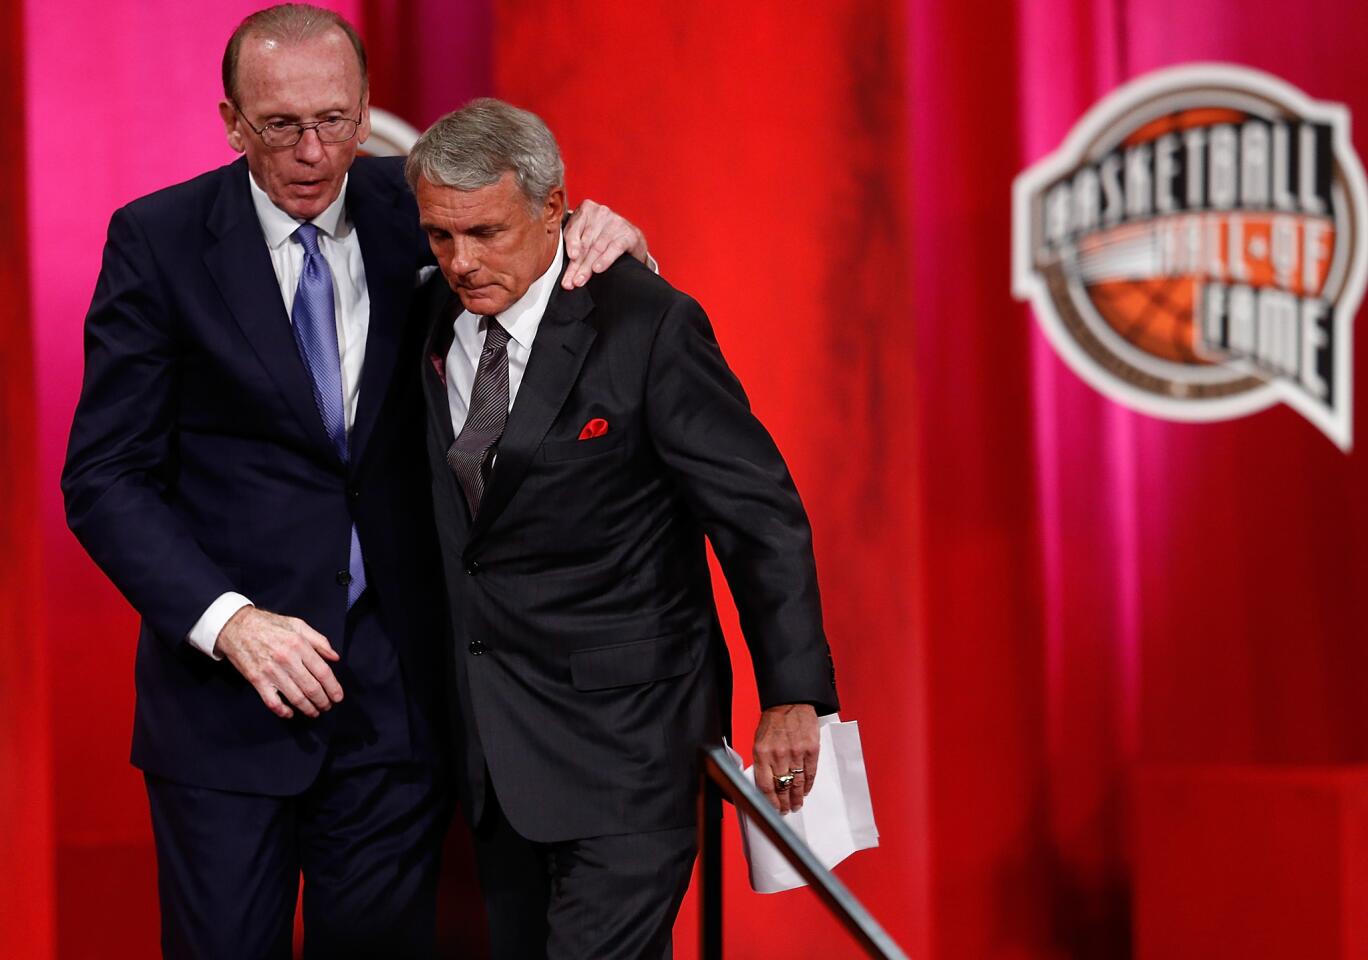 Gary Williams leaves the podium with presenter Billy Cunningham after his enshrinement ceremony at the Naismith Memorial Basketball Hall of Fame.